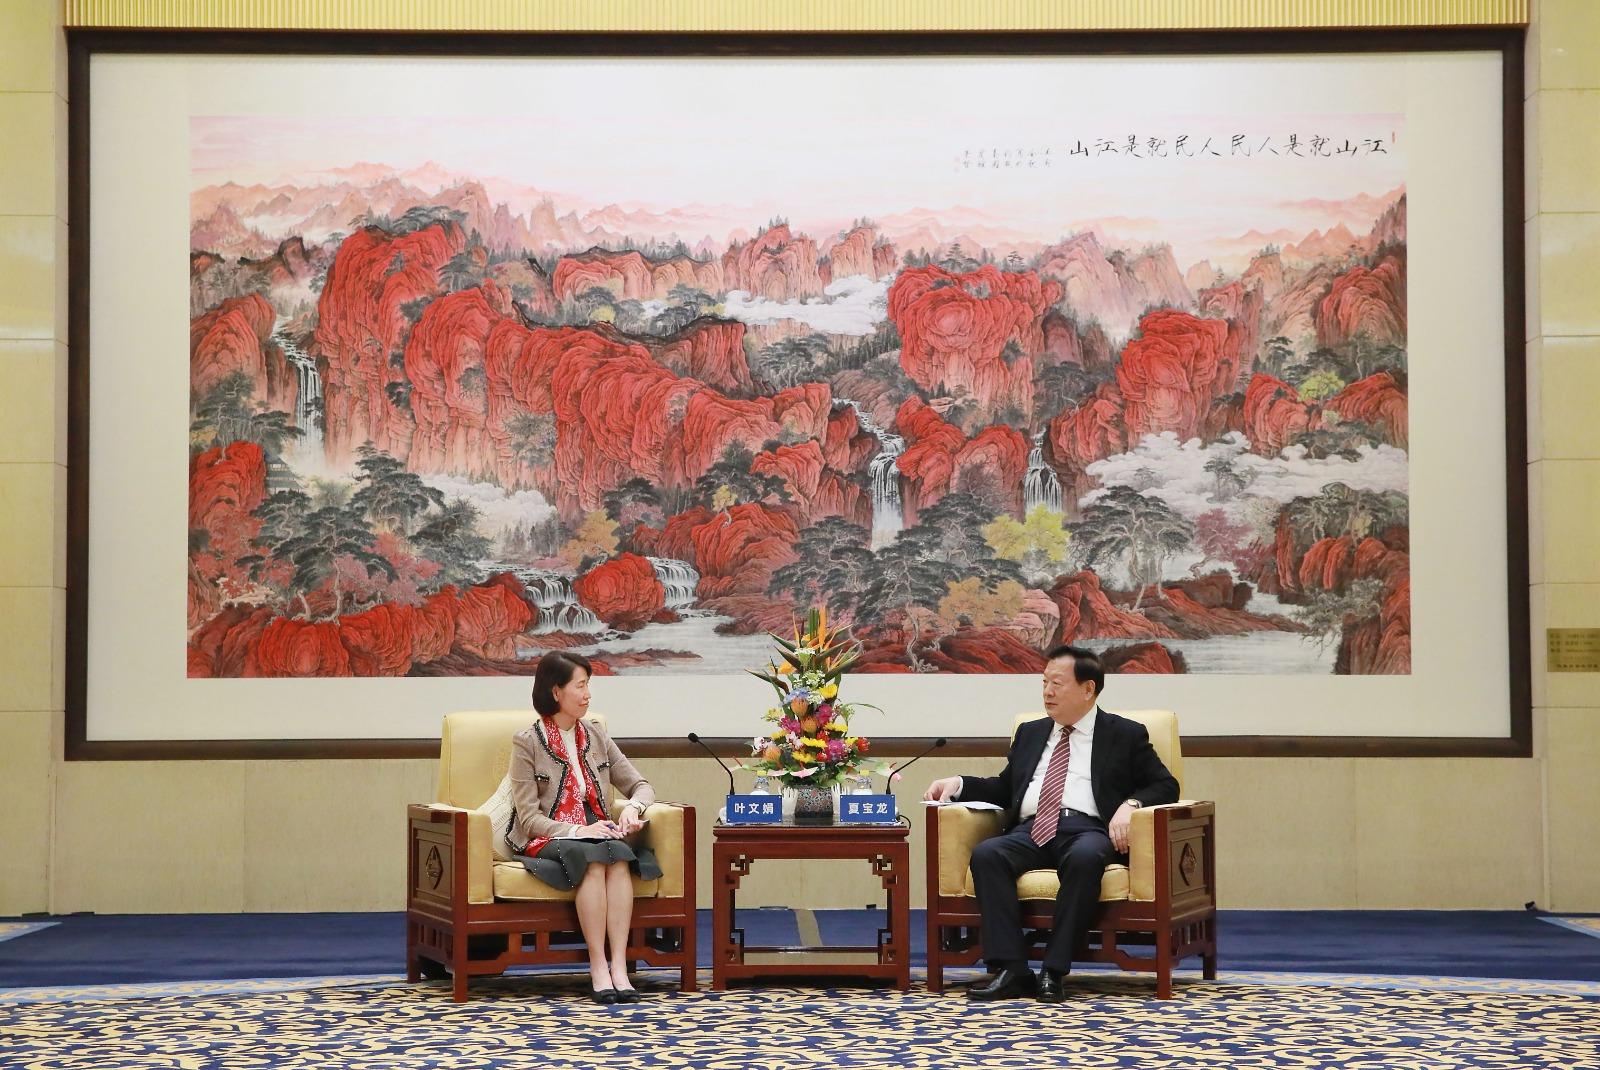 The Director of the Hong Kong and Macao Affairs Office of the State Council, Mr Xia Baolong (right), met a delegation of politically appointed officials led by the Director of the Chief Executive's Office, Ms Carol Yip (left) in Beijing this afternoon (November 21). The delegation was on a national studies programme and duty visit.